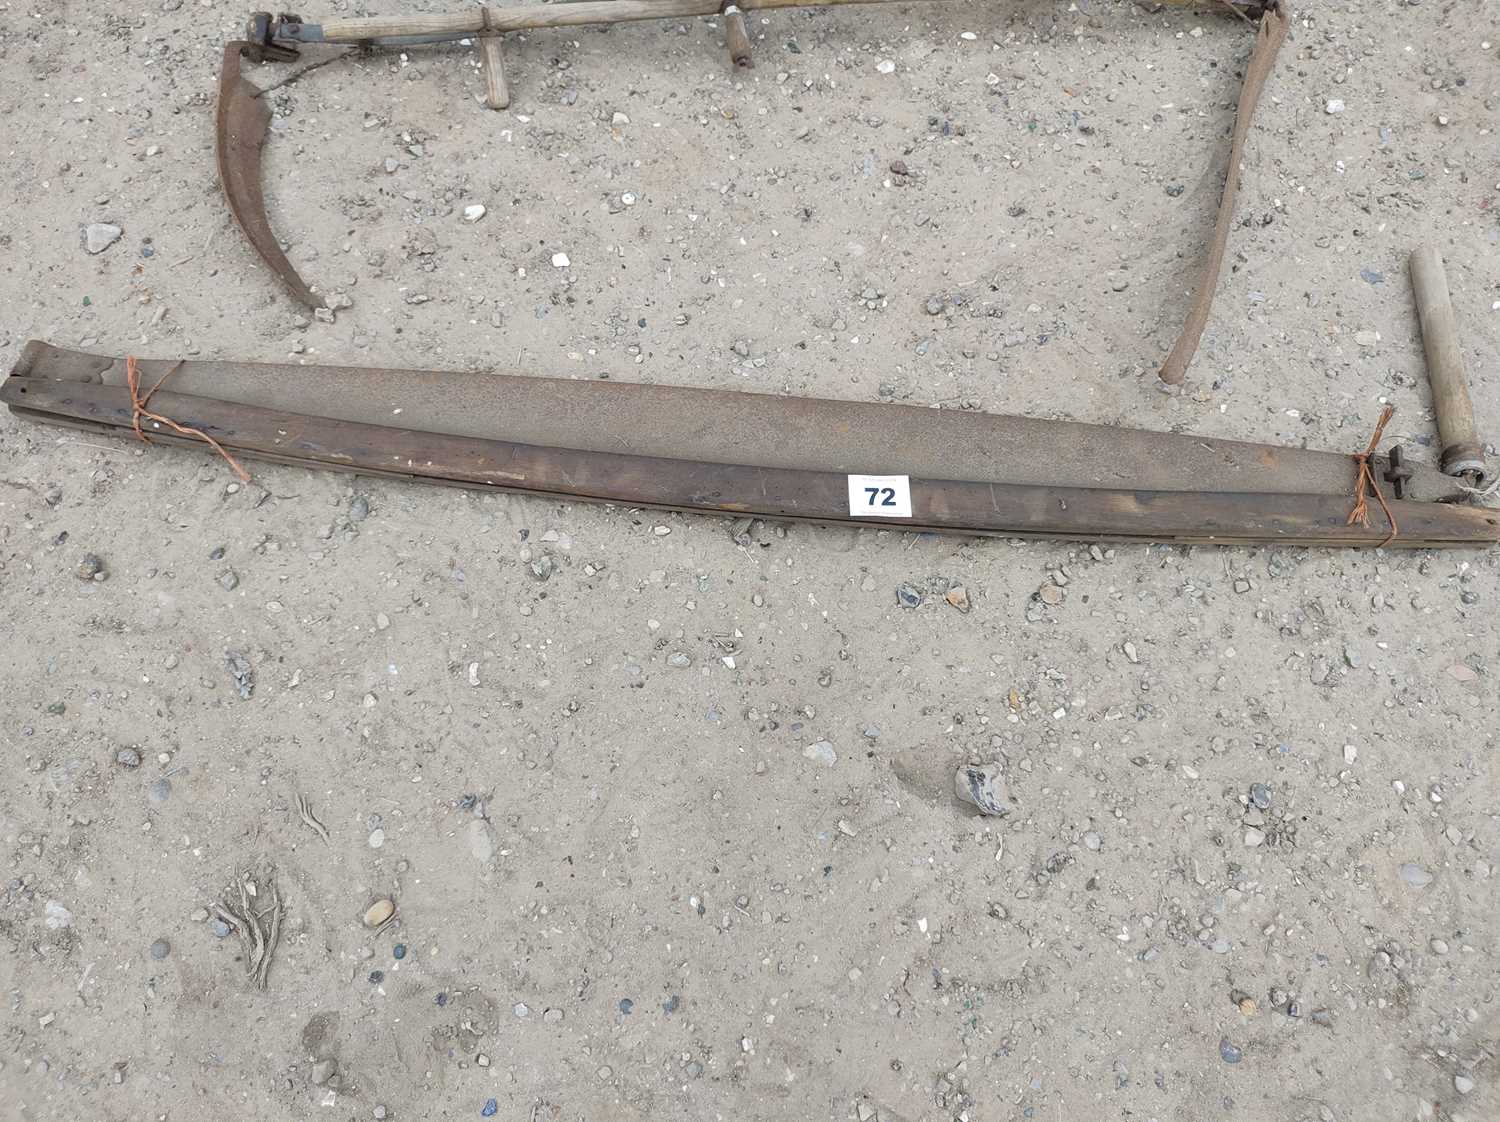 Lot 72 - 1 x Wooden Saw